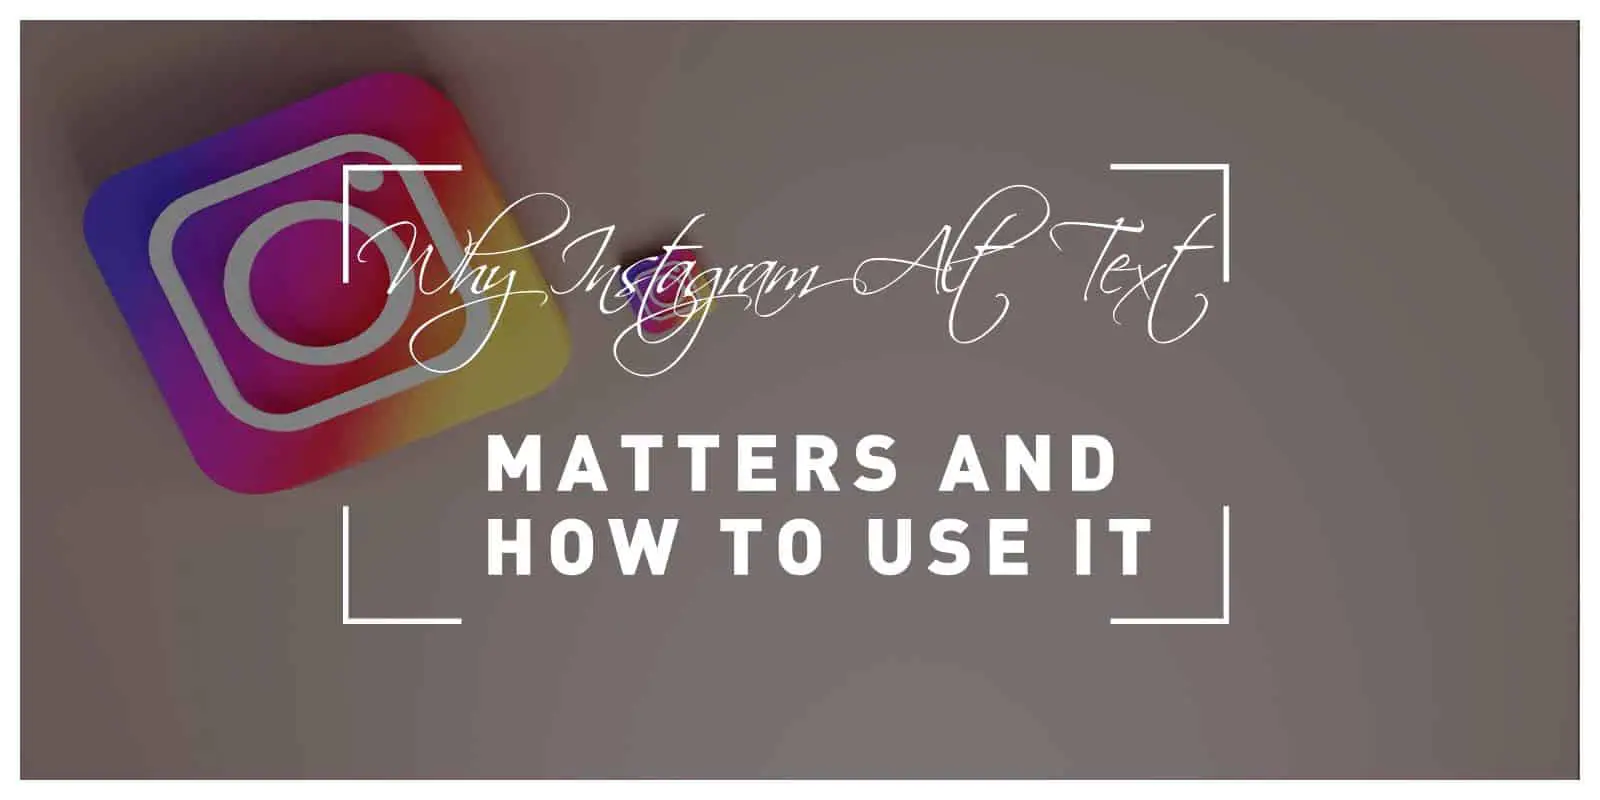 why instagram alt text matters (and how to use it)